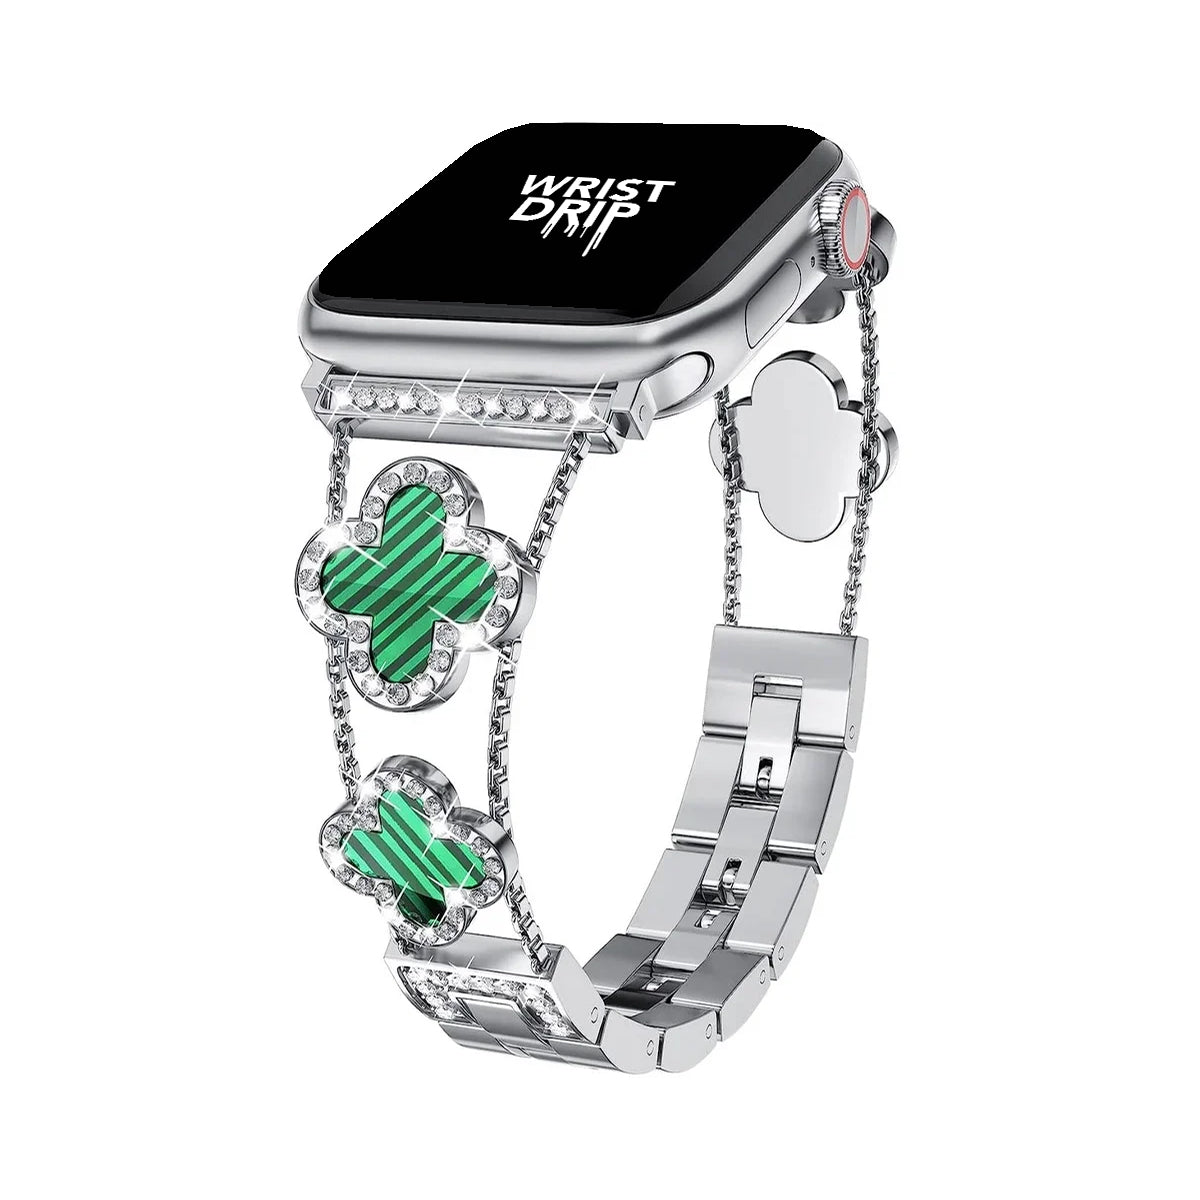 The Desire Stainless Steel Apple Watch Band (5 Colours)